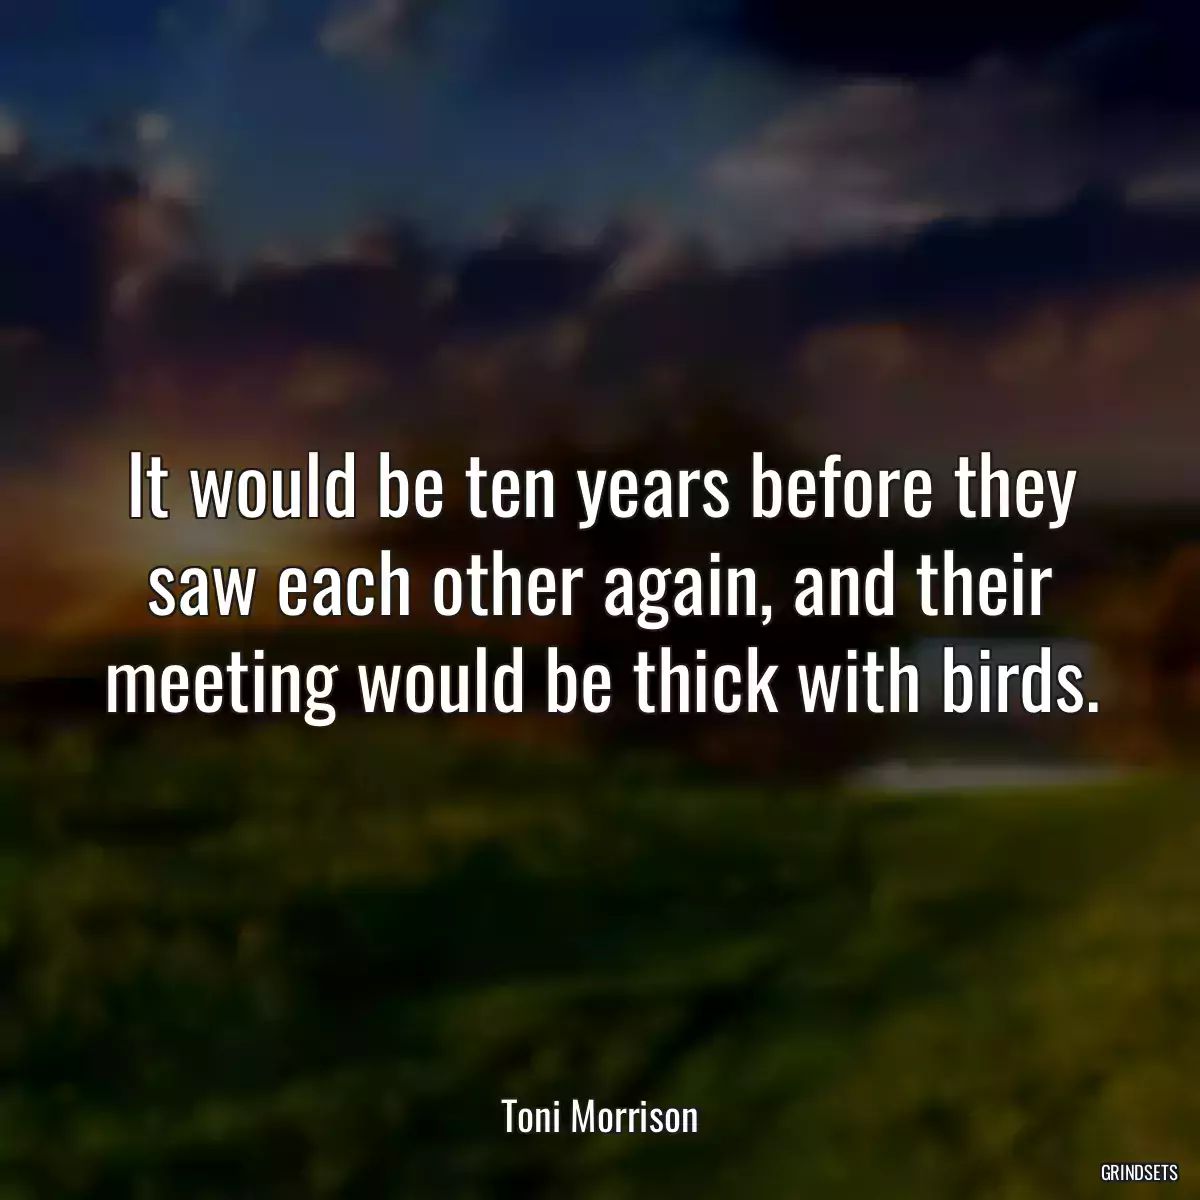 It would be ten years before they saw each other again, and their meeting would be thick with birds.